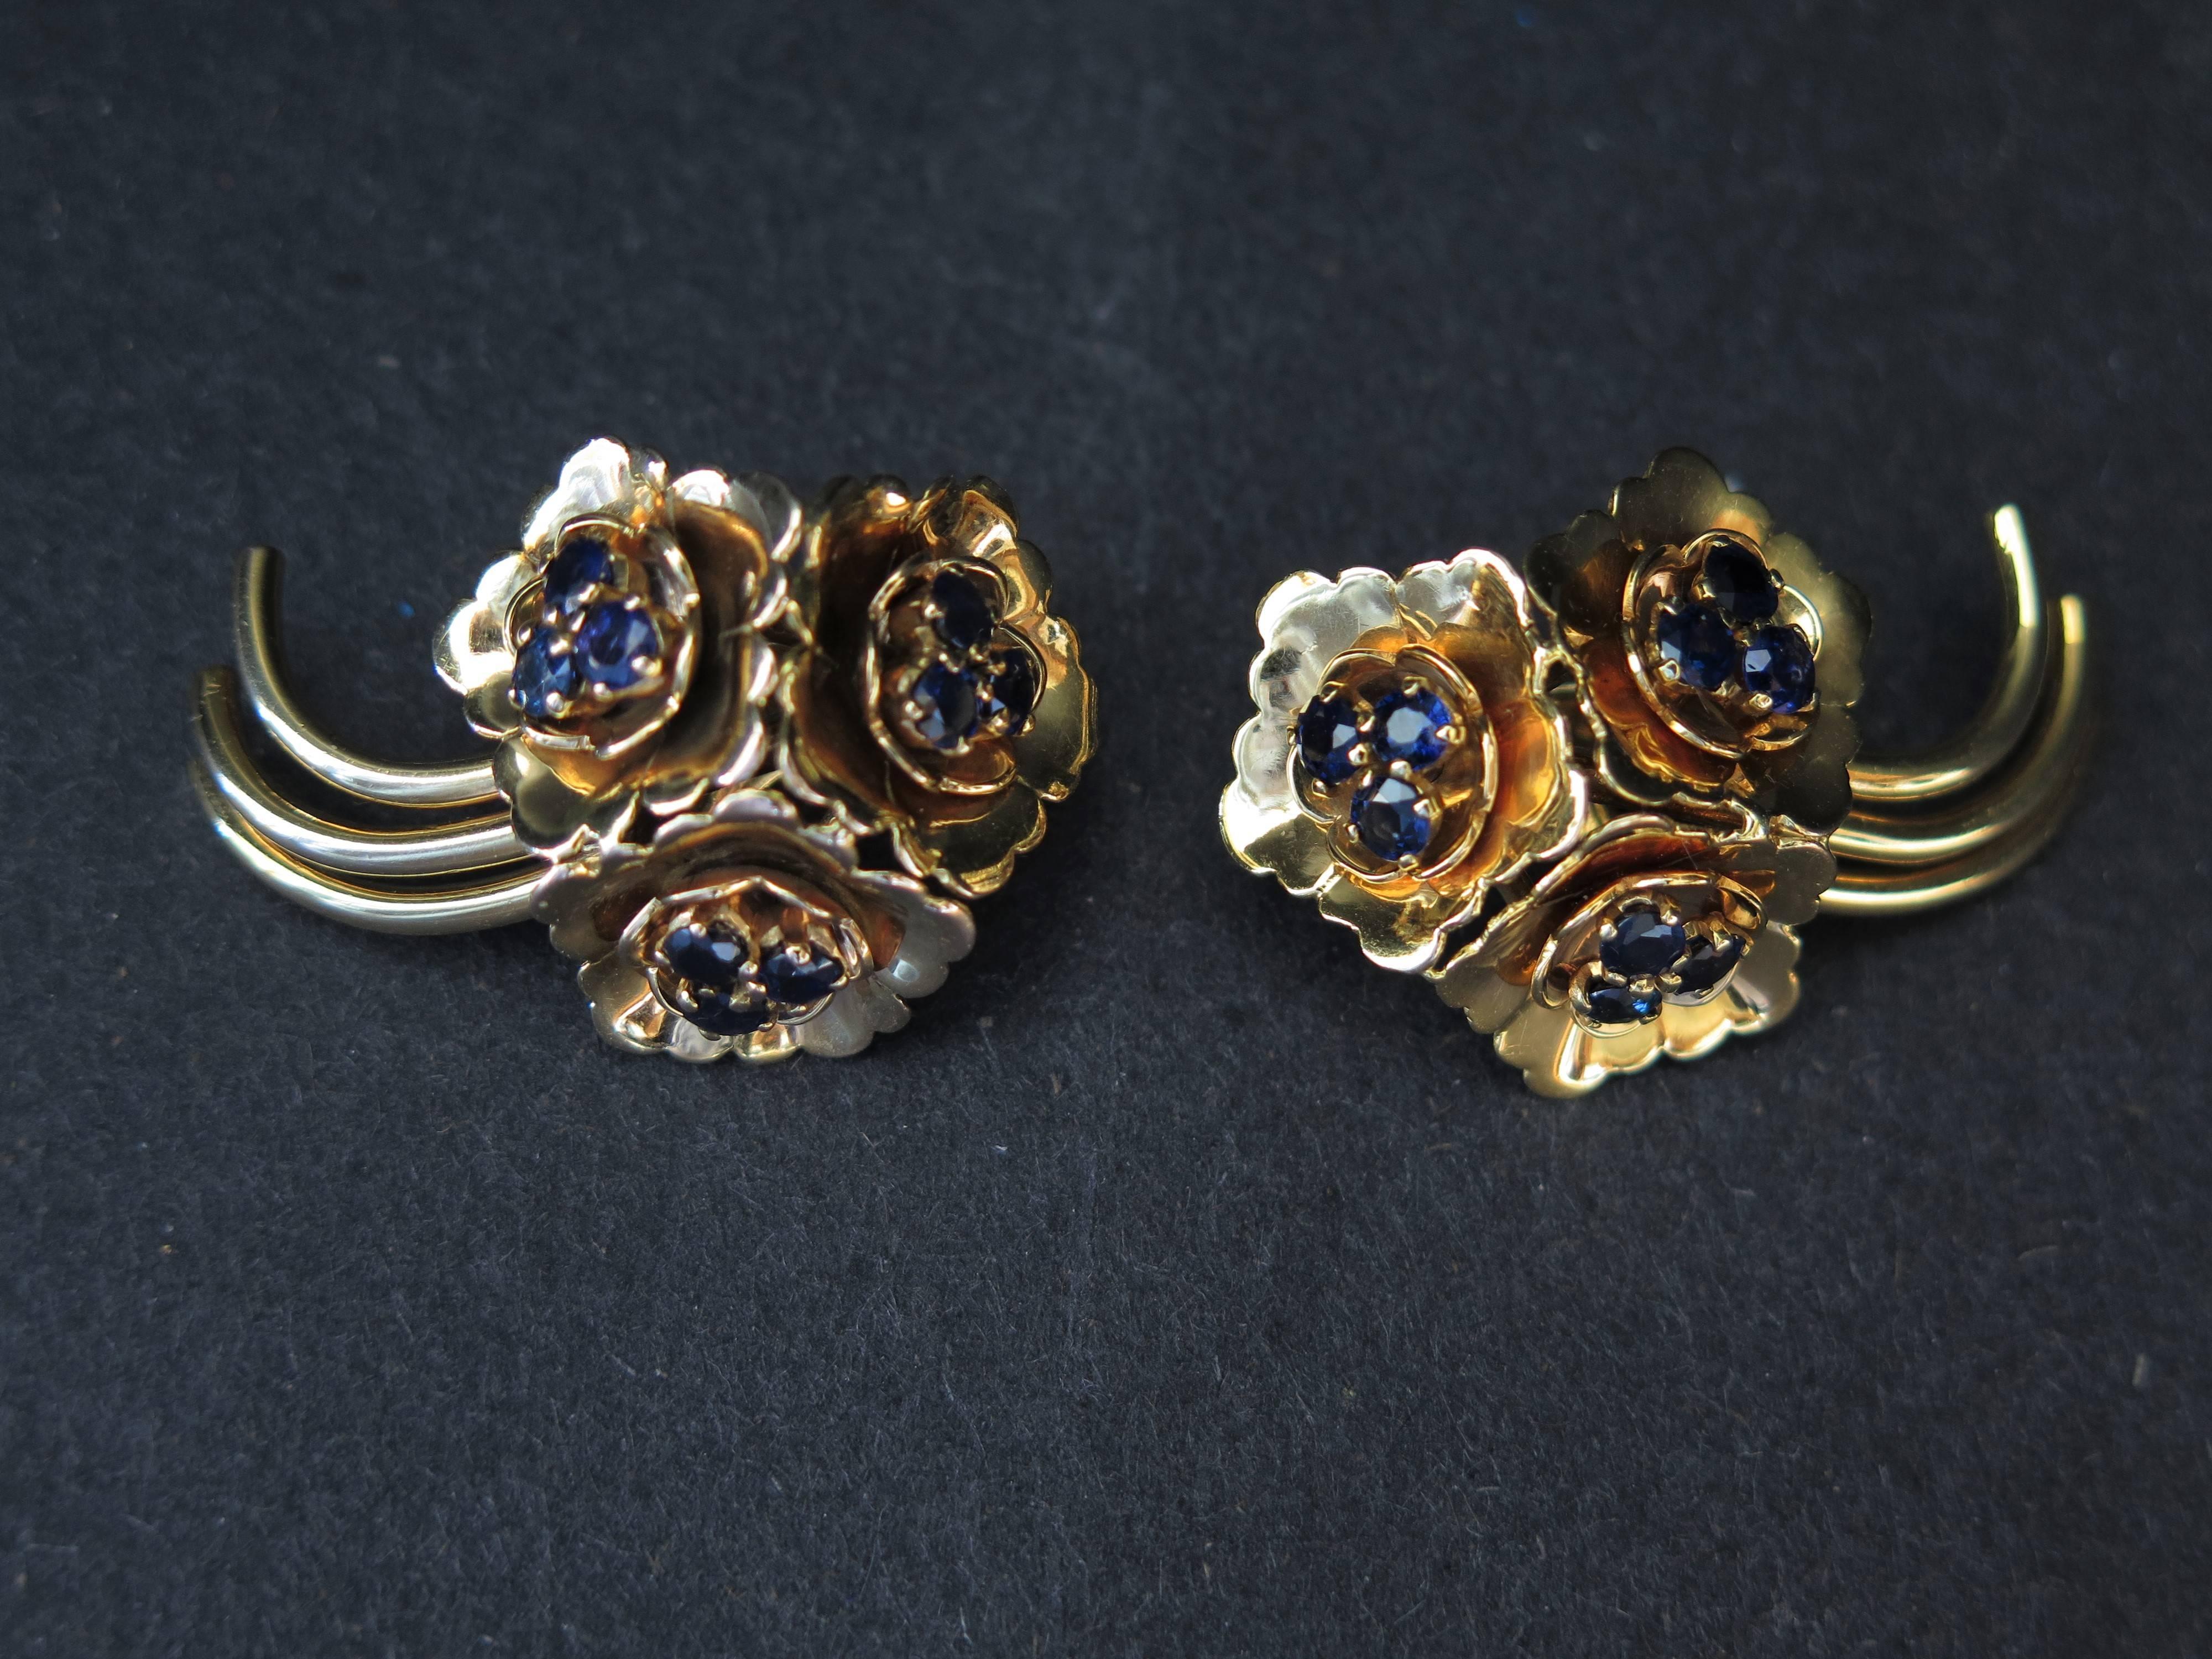 A lovely pair of 1950's Retro earrings by Kutchinsky. 
Each clip earring is fashioned as a group of three flowers with long, curved stems. Each en tremblant open blossom featuring three stamen of blue sapphire. 
Signed Kutchinsky. 